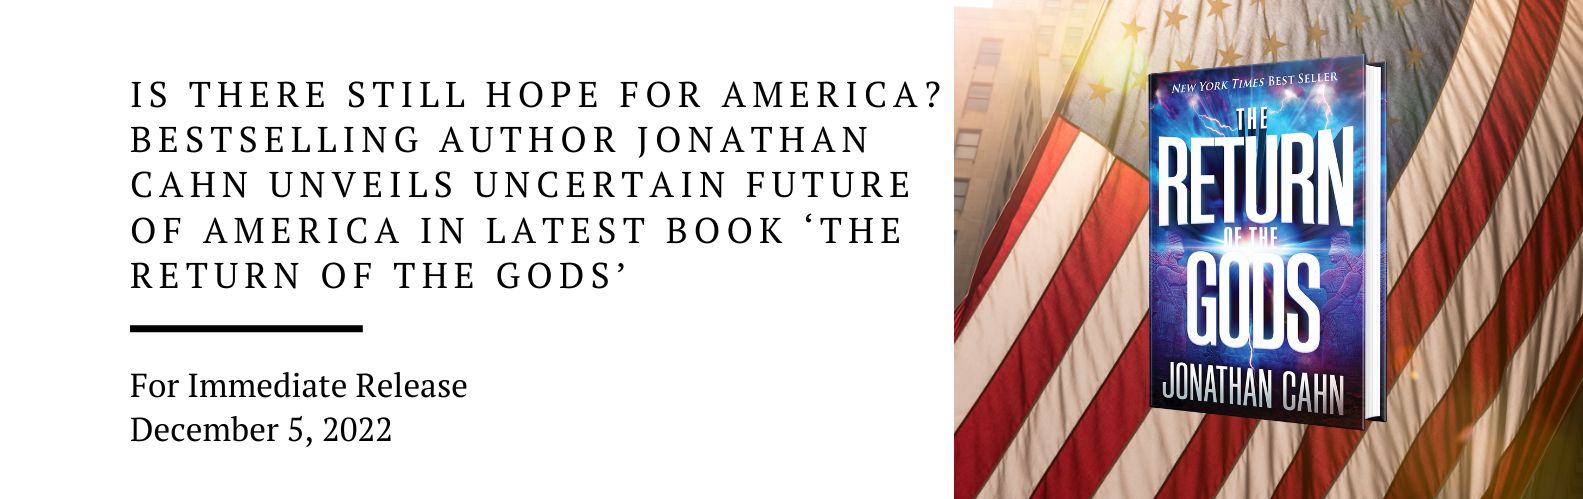 Is there still hope for America? Bestselling author Jonathan Cahn unveils uncertain future of America in latest book ‘The Return of the Gods’